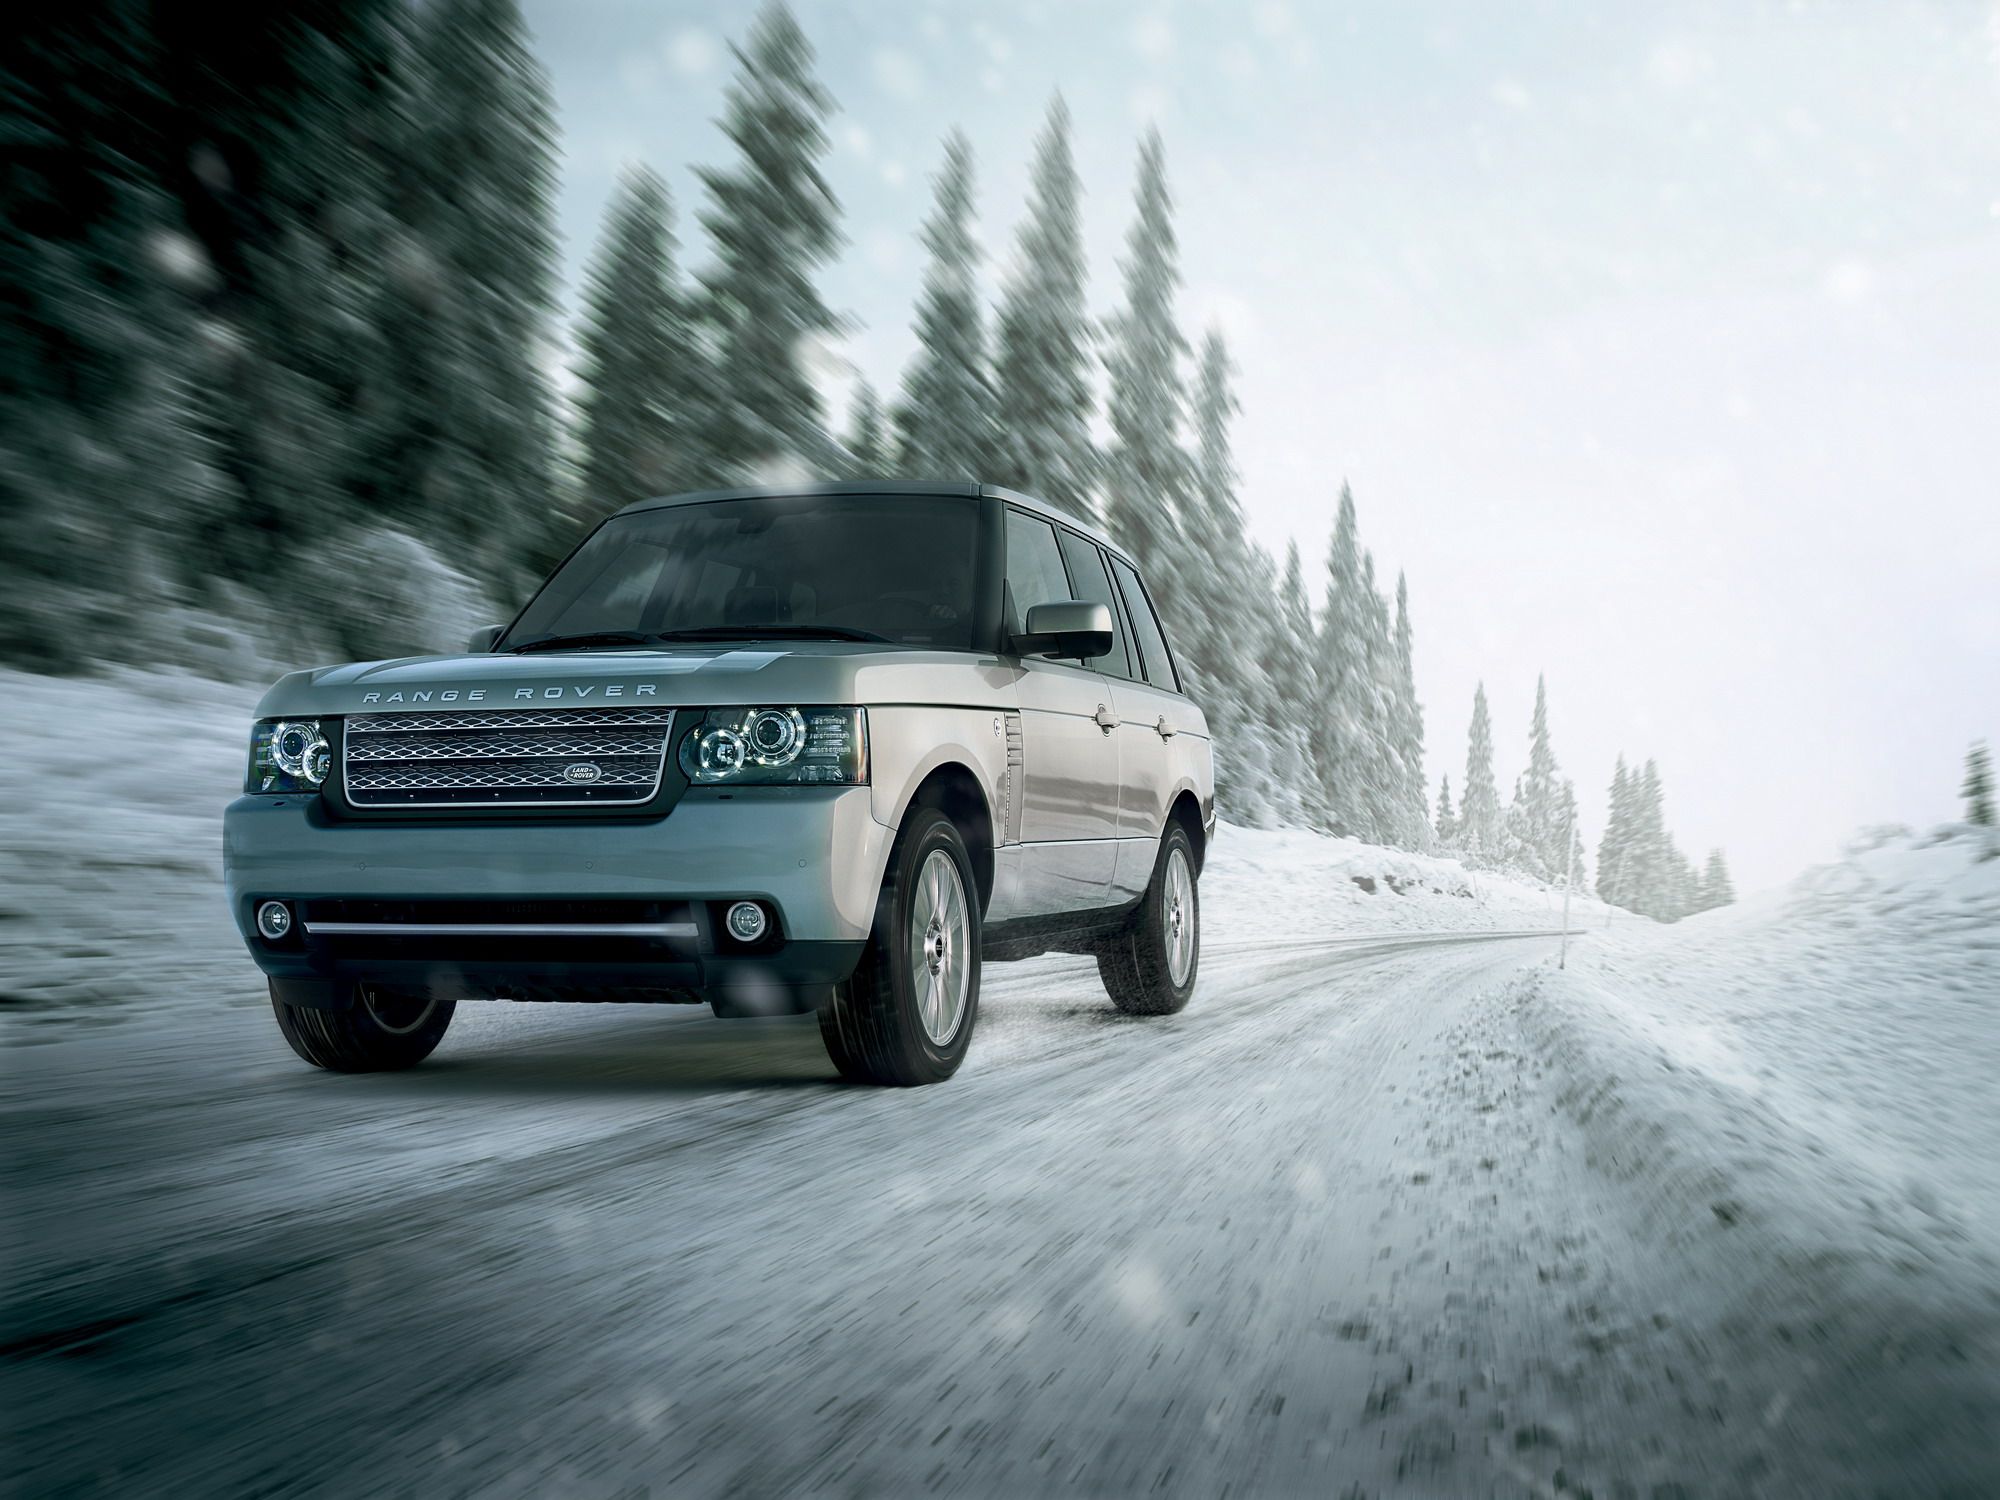 2012 Land Rover Range Rover Westminster Edition